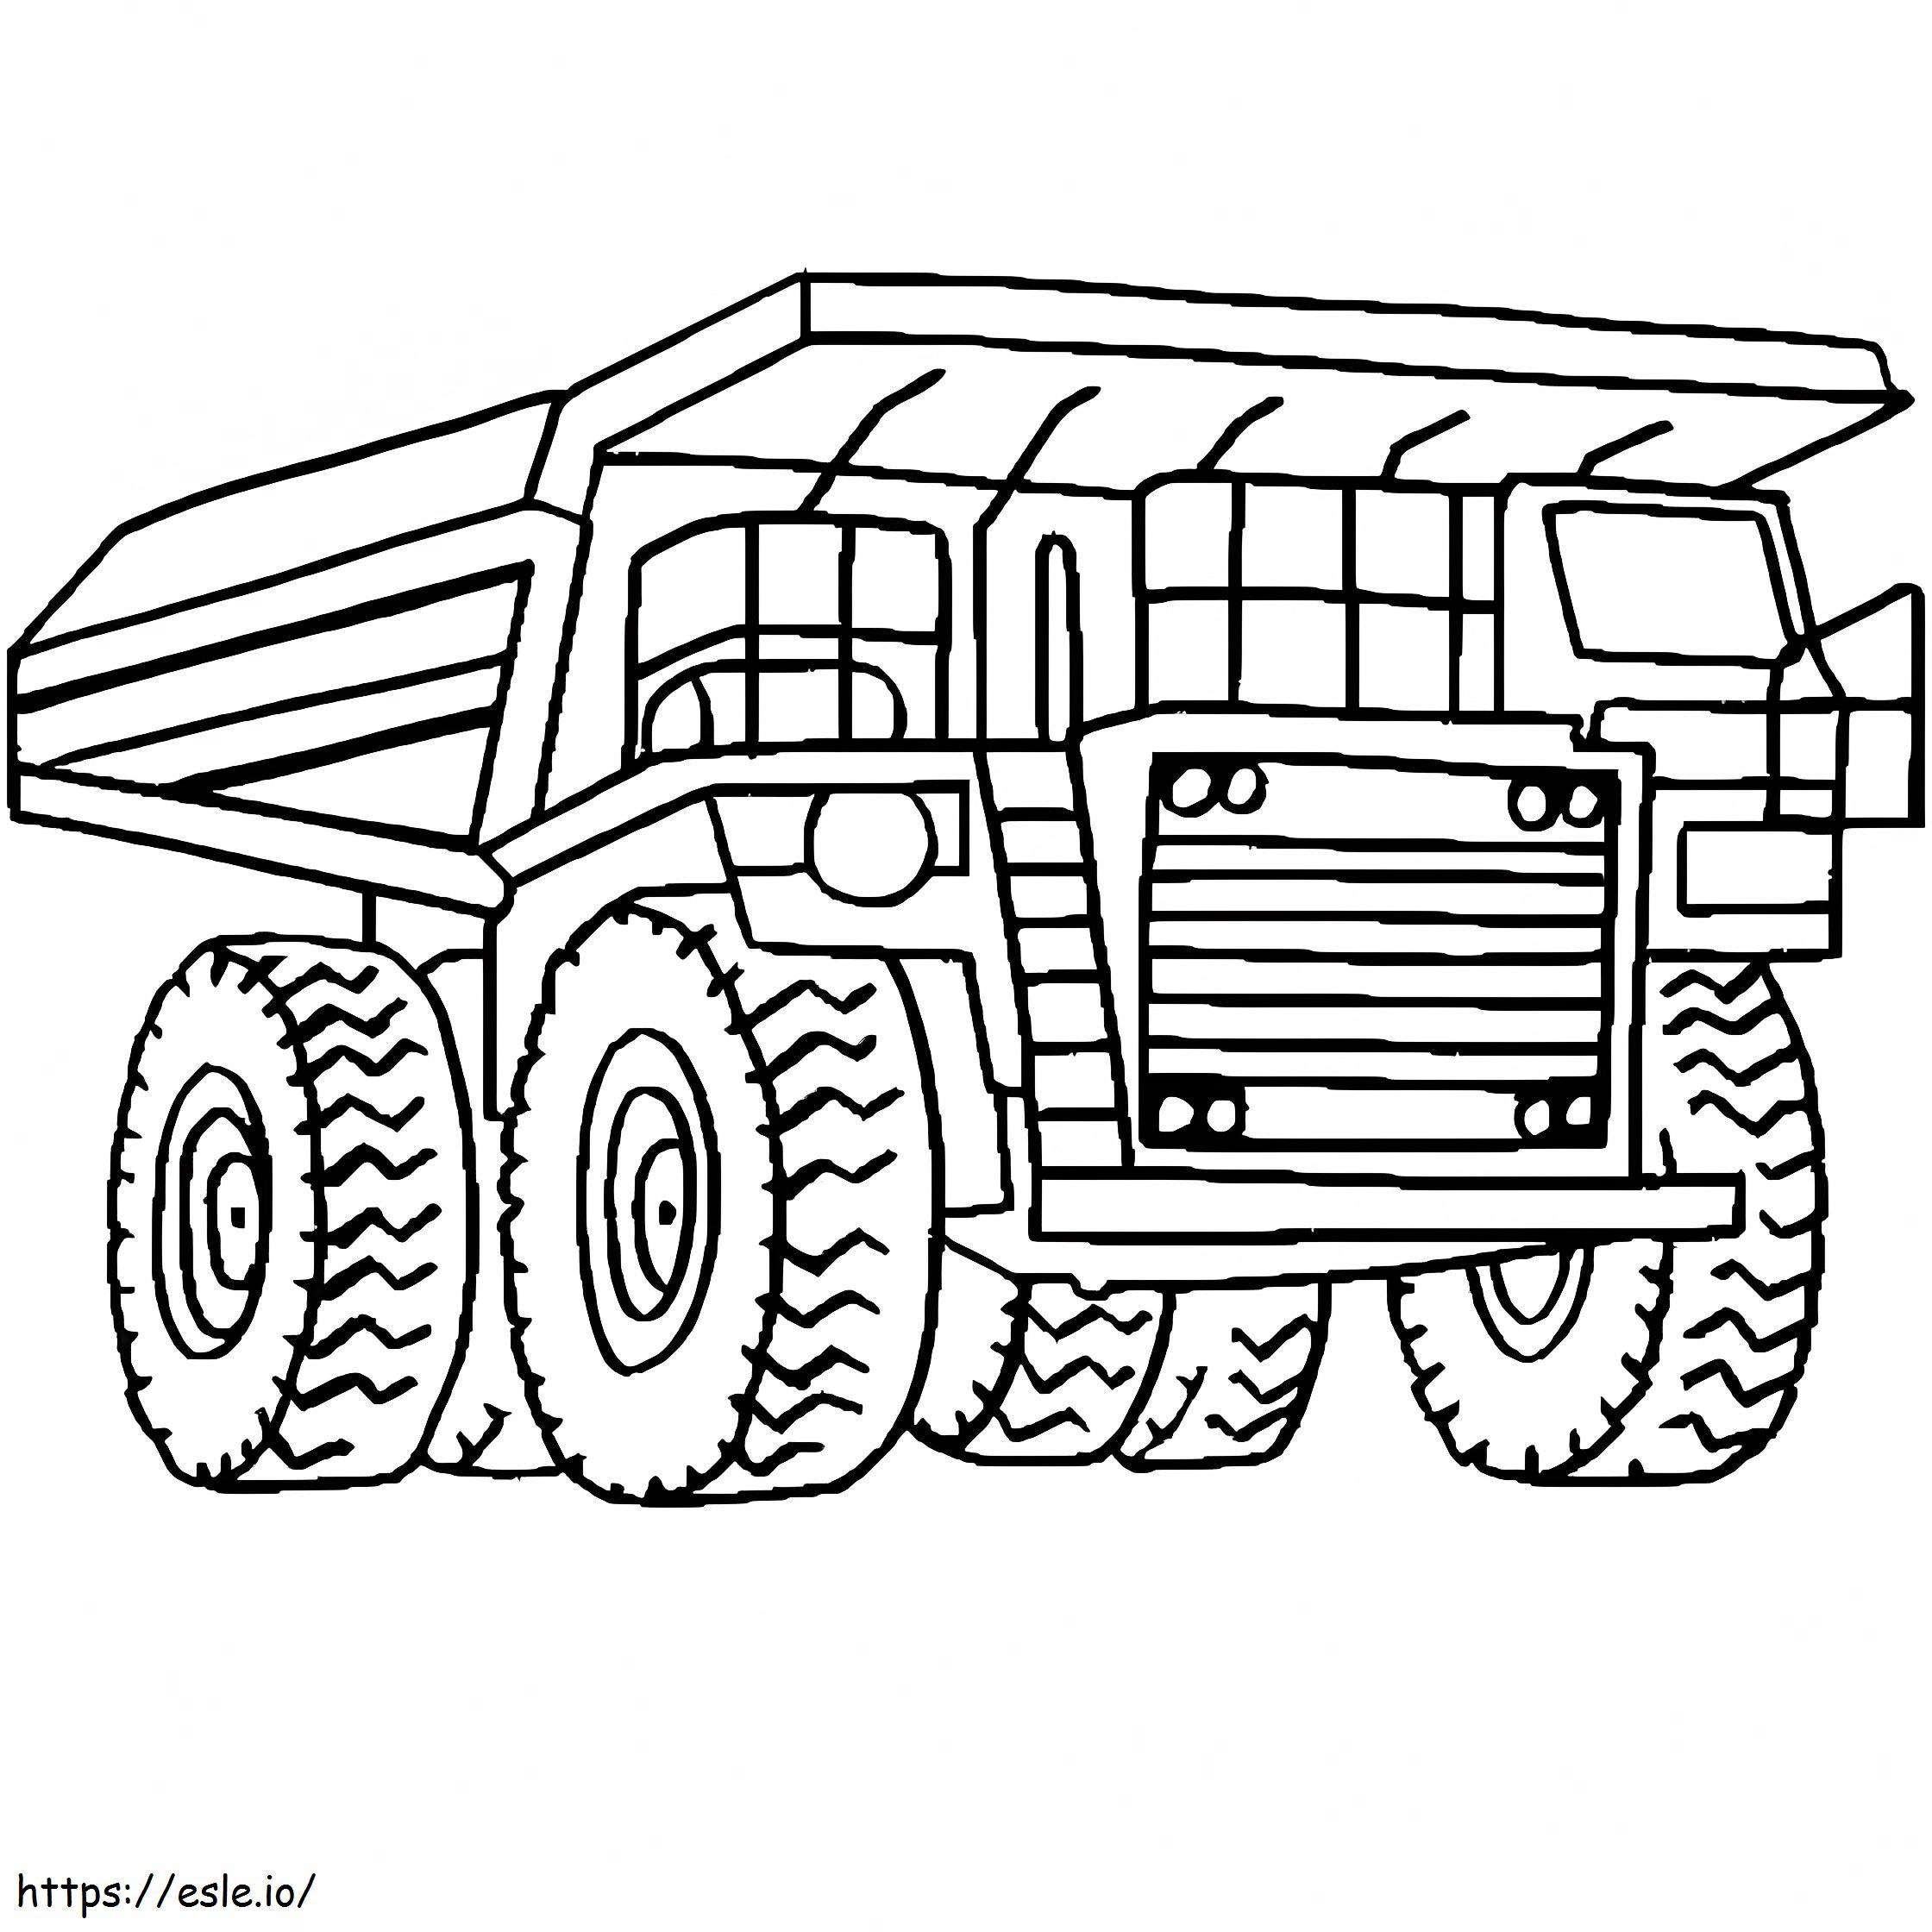 Good Truck coloring page